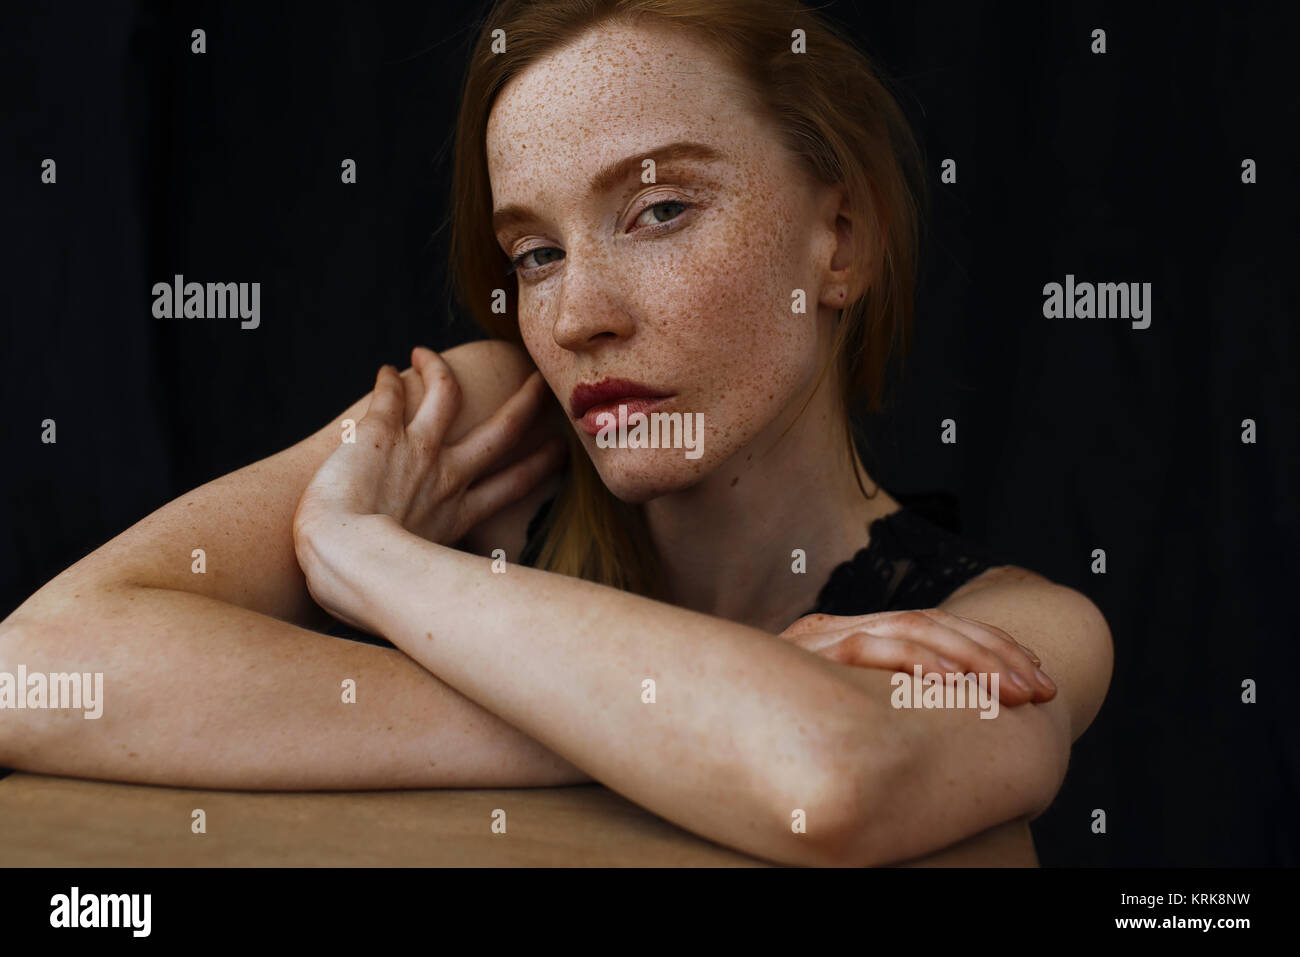 Close up of serious Caucasian woman with freckles Banque D'Images